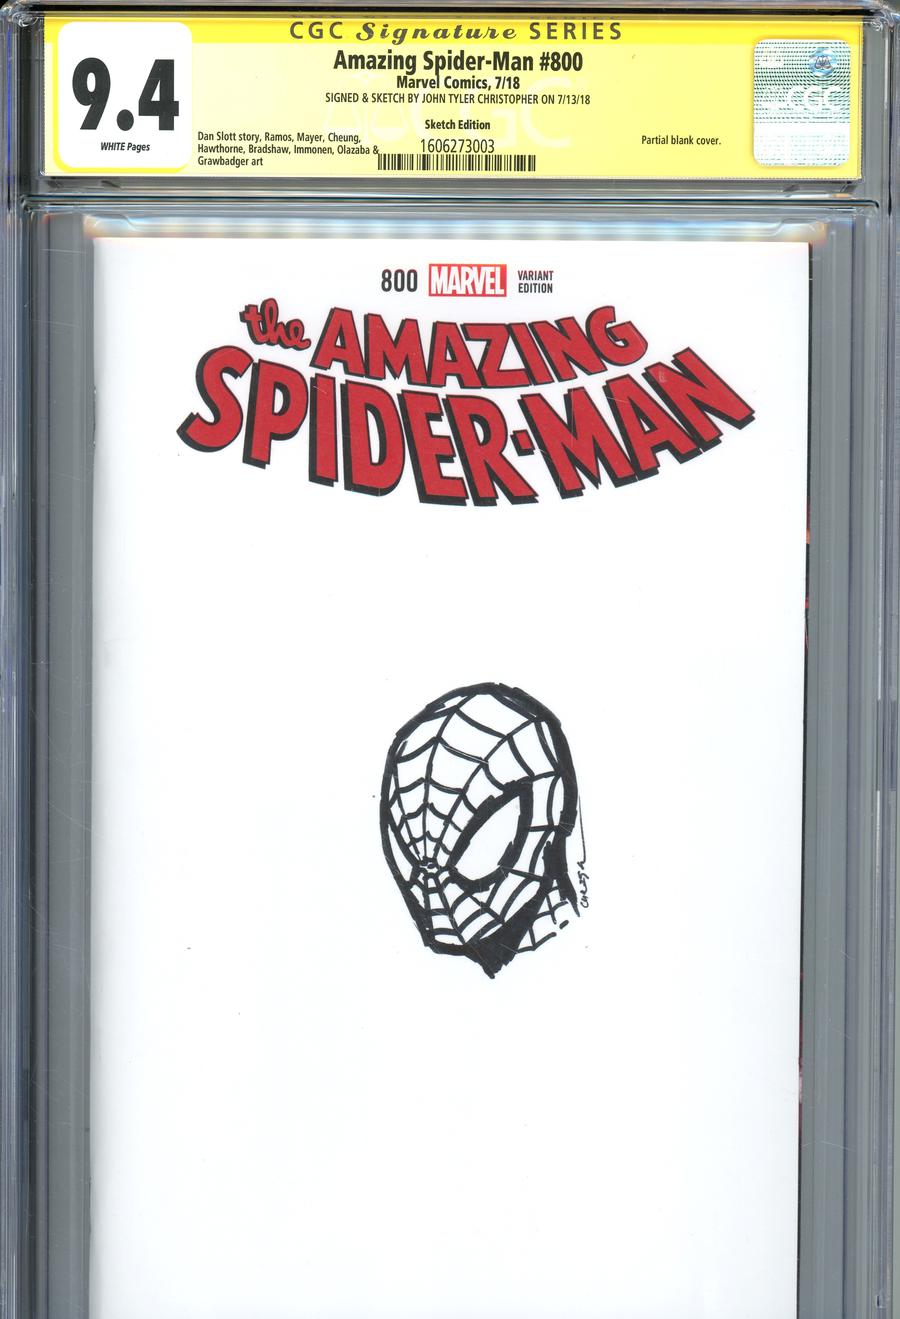 Amazing Spider-Man Vol 4 #800 Cover Z-I Variant Blank Cover Signed & Sketched By John Tyler Christopher CGC 9.4